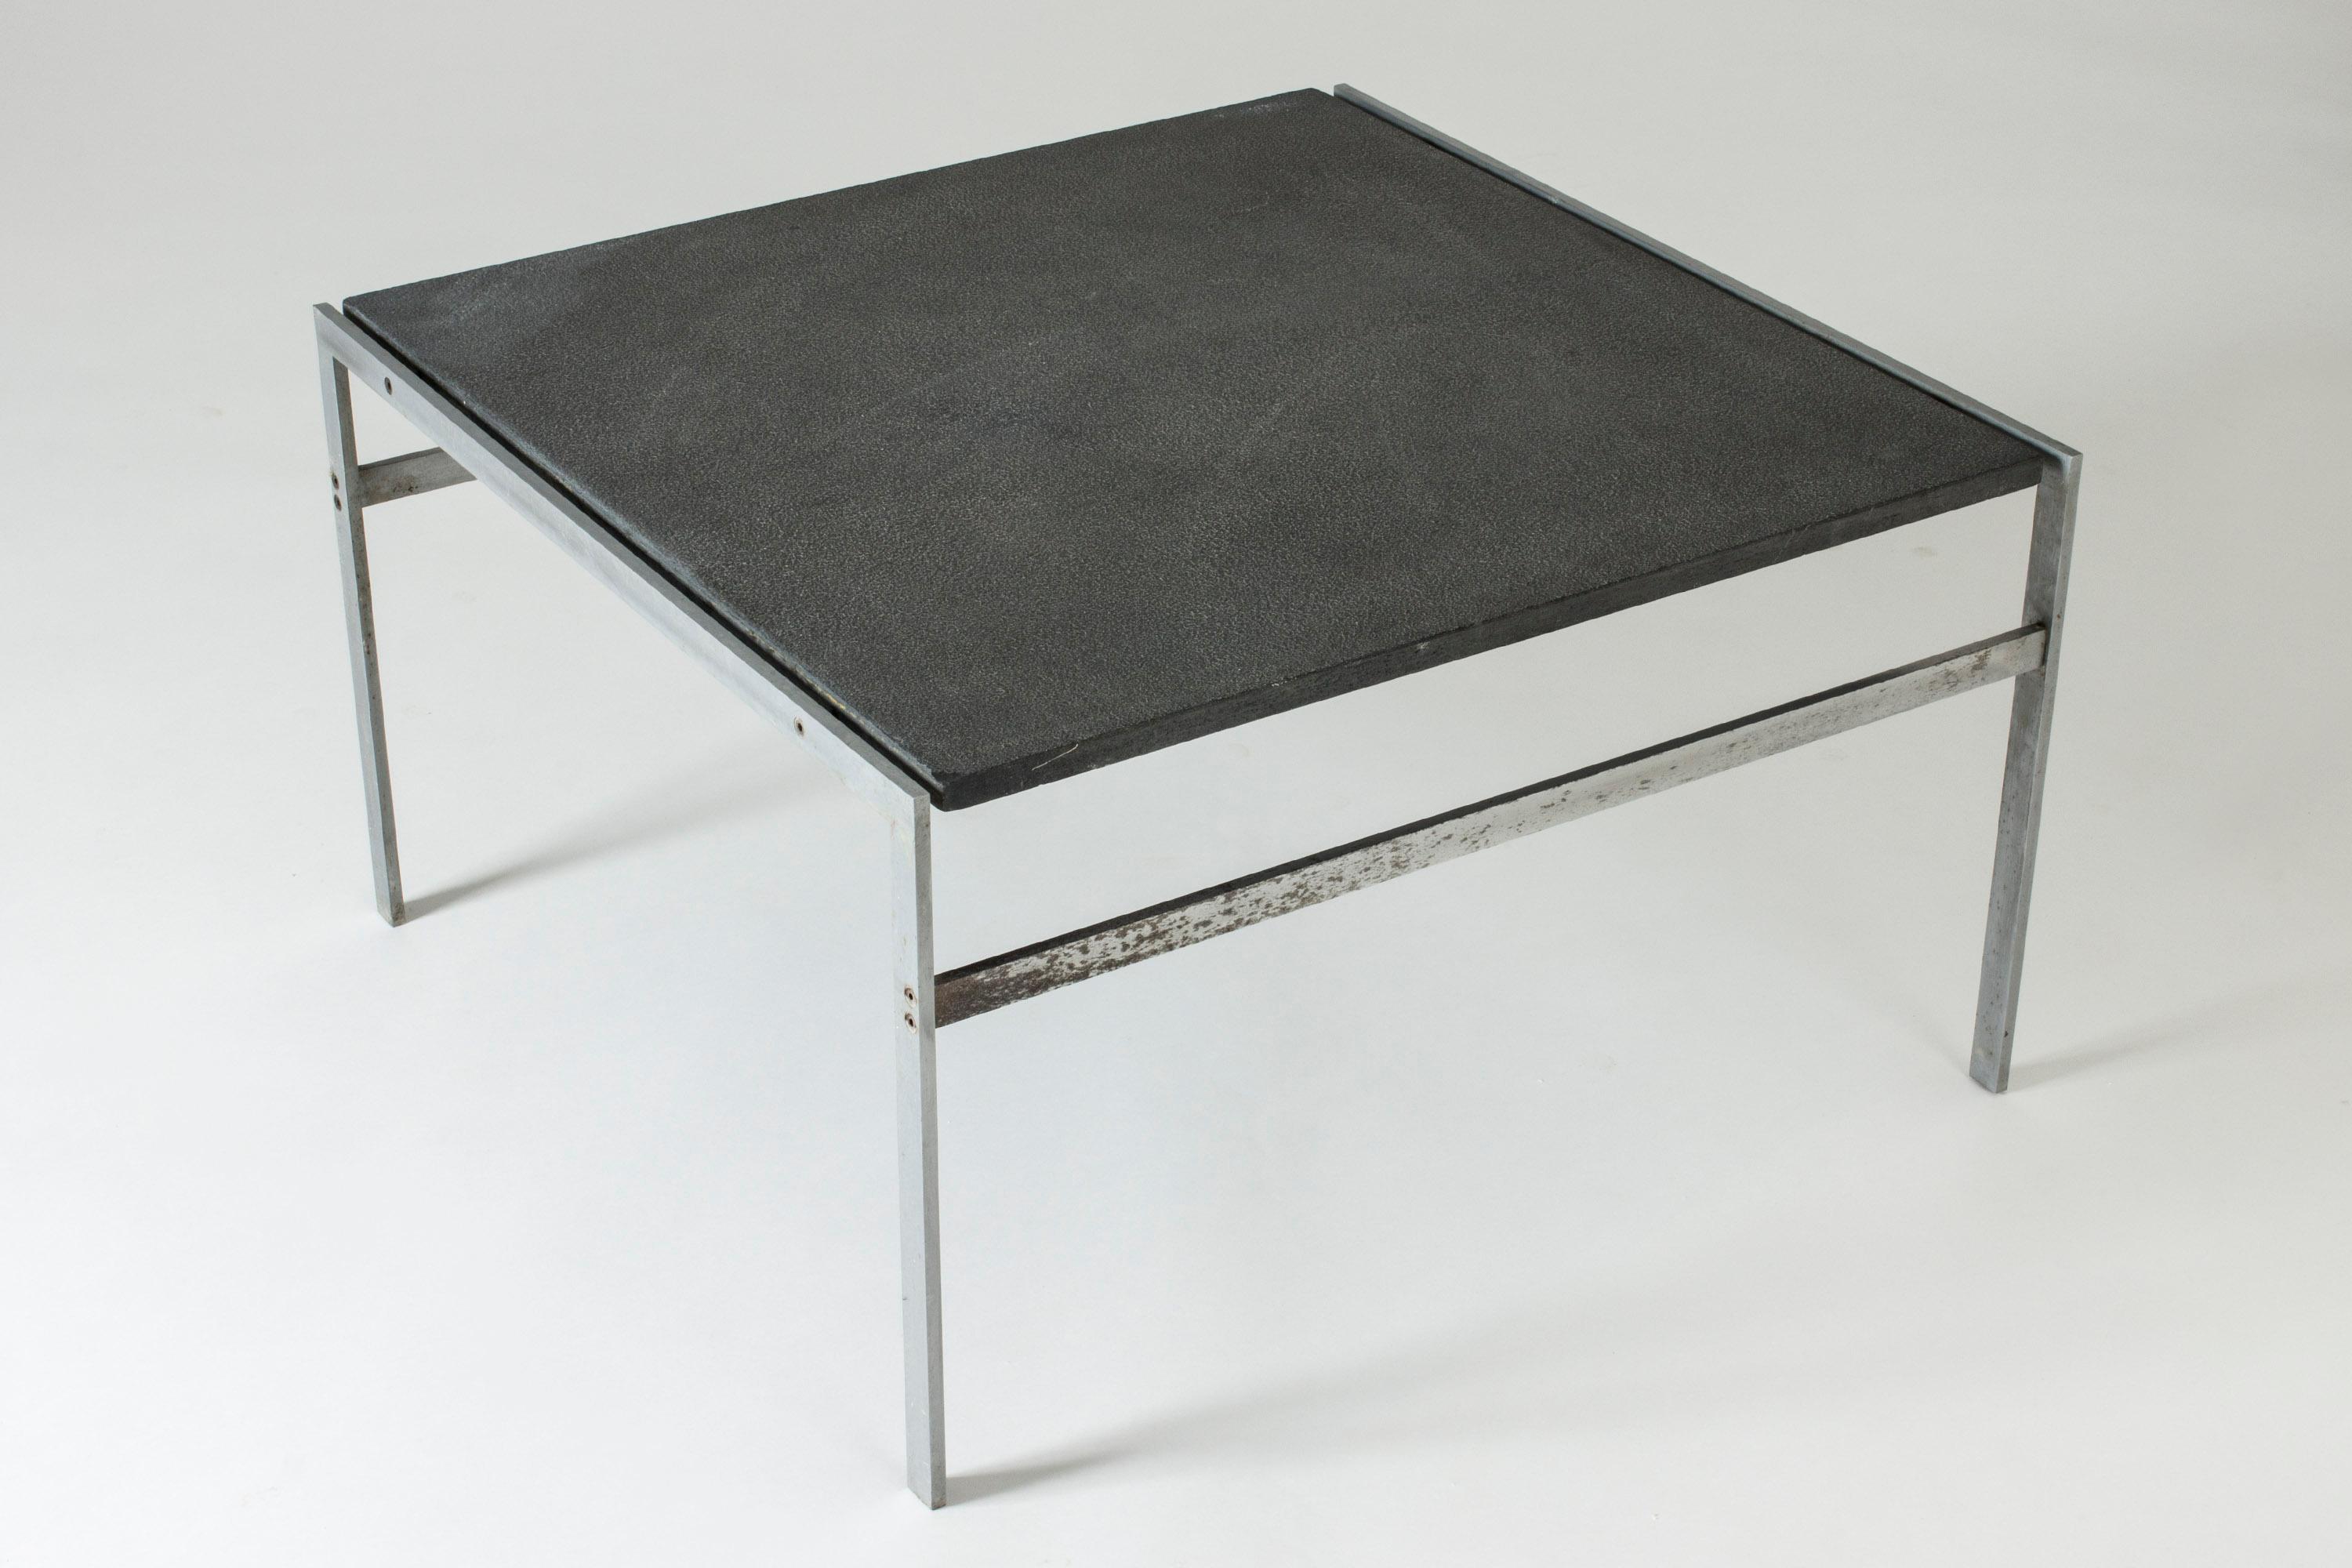 Cool coffee table by Preben Fabricius & Jørgen Kastholm, made from a crisply cut steel frame and a grey, structured stone tabletop.